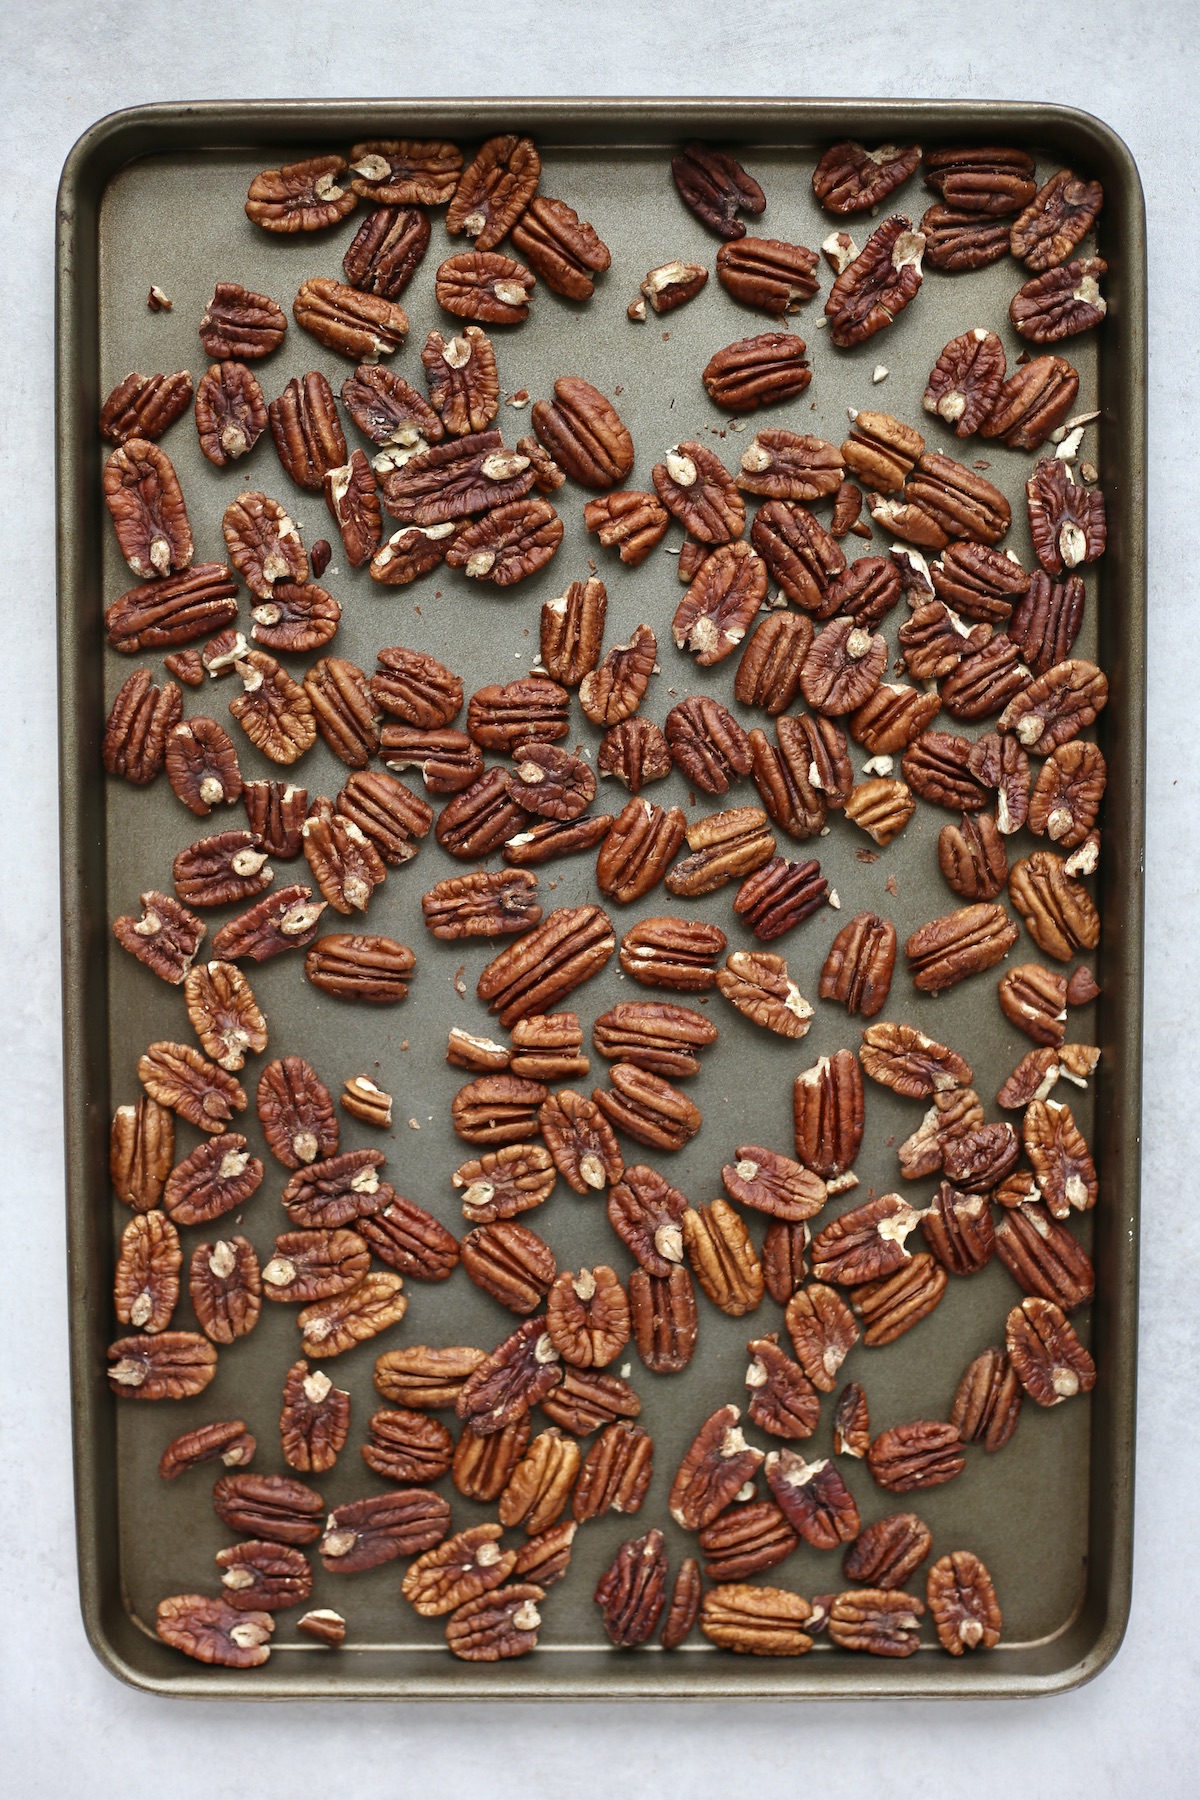 Raw pecans spread out on a silver baking sheet. 